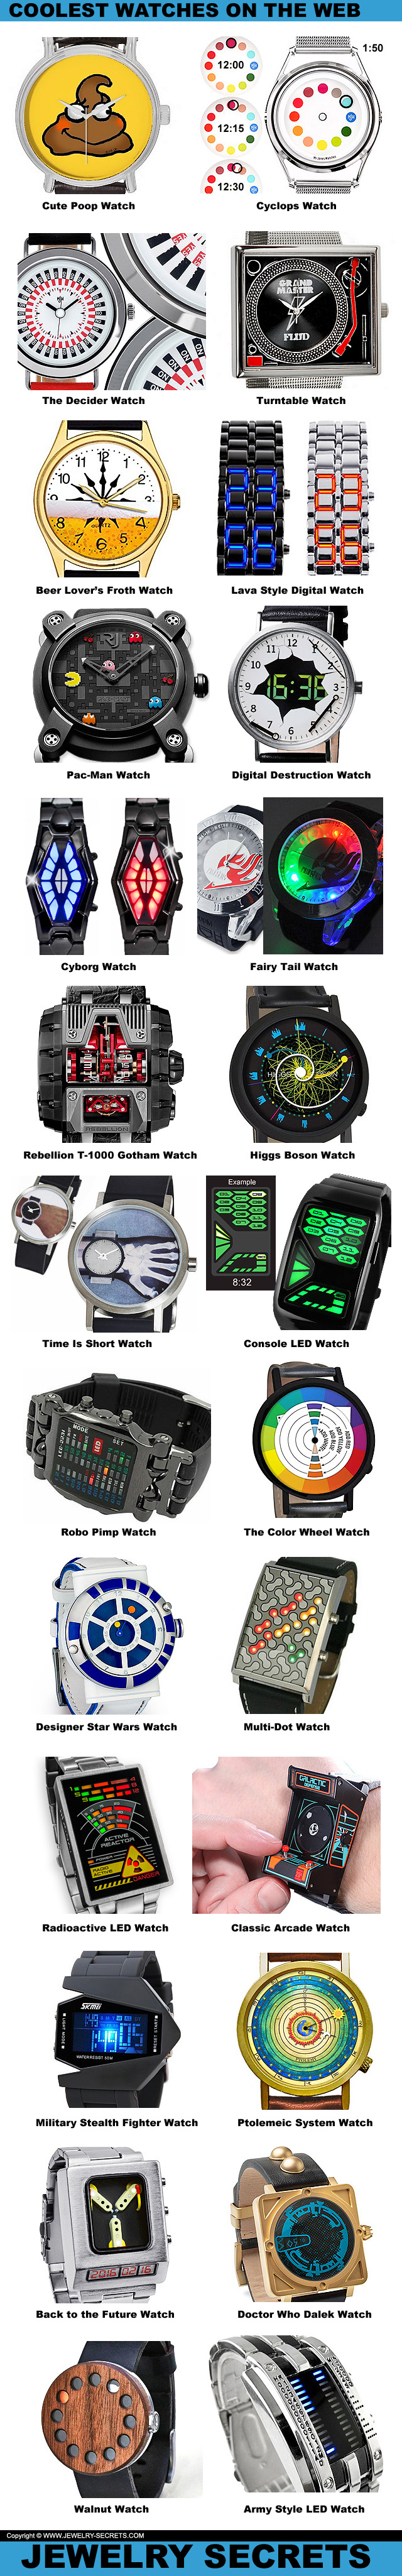 The Coolest Wrist Watches On The Web